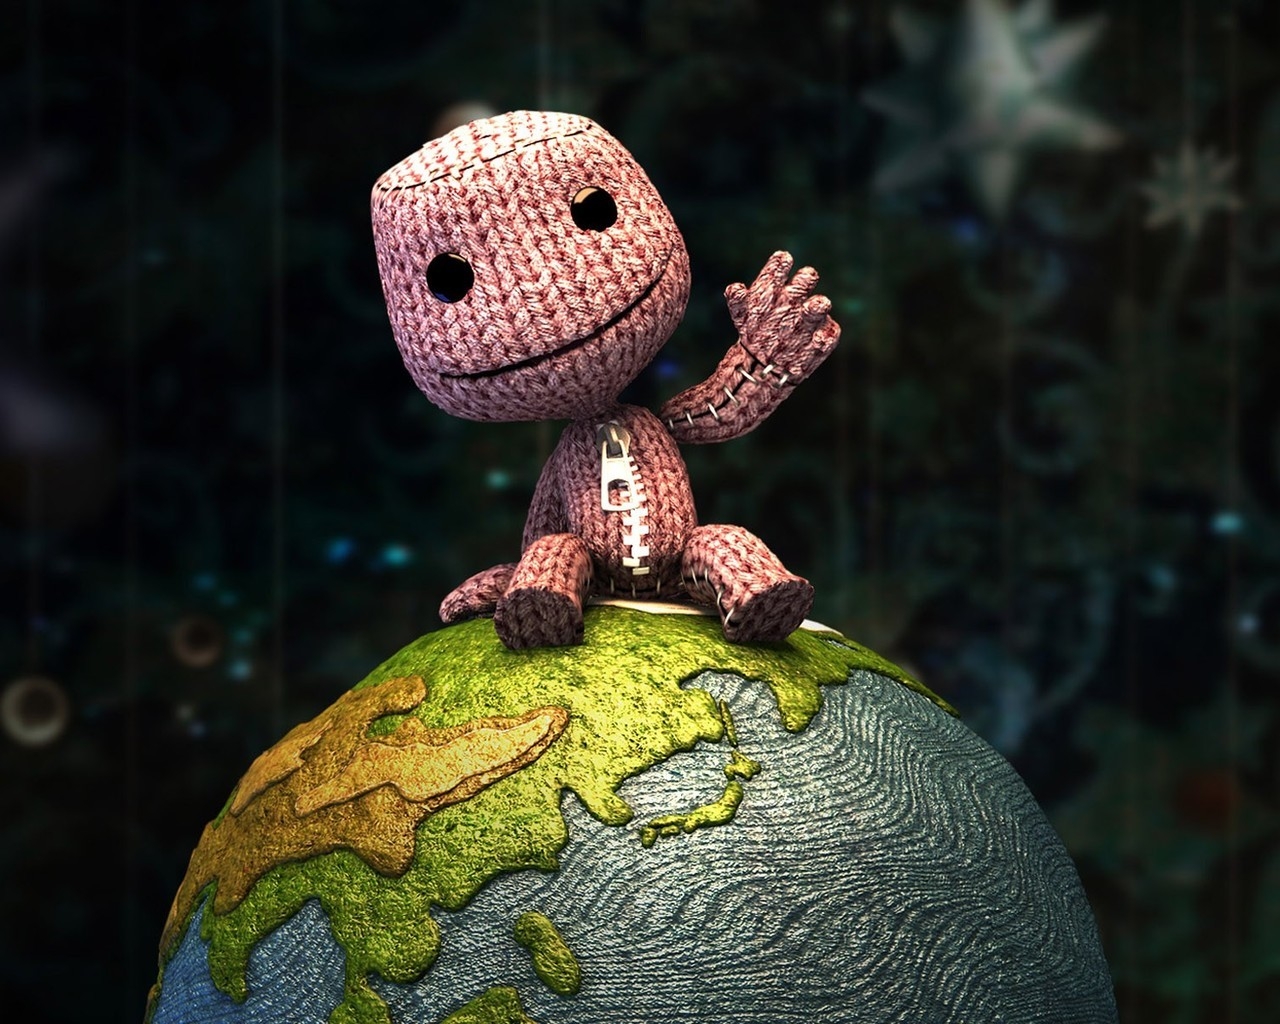 Happy Pink Mascot for 1280 x 1024 resolution